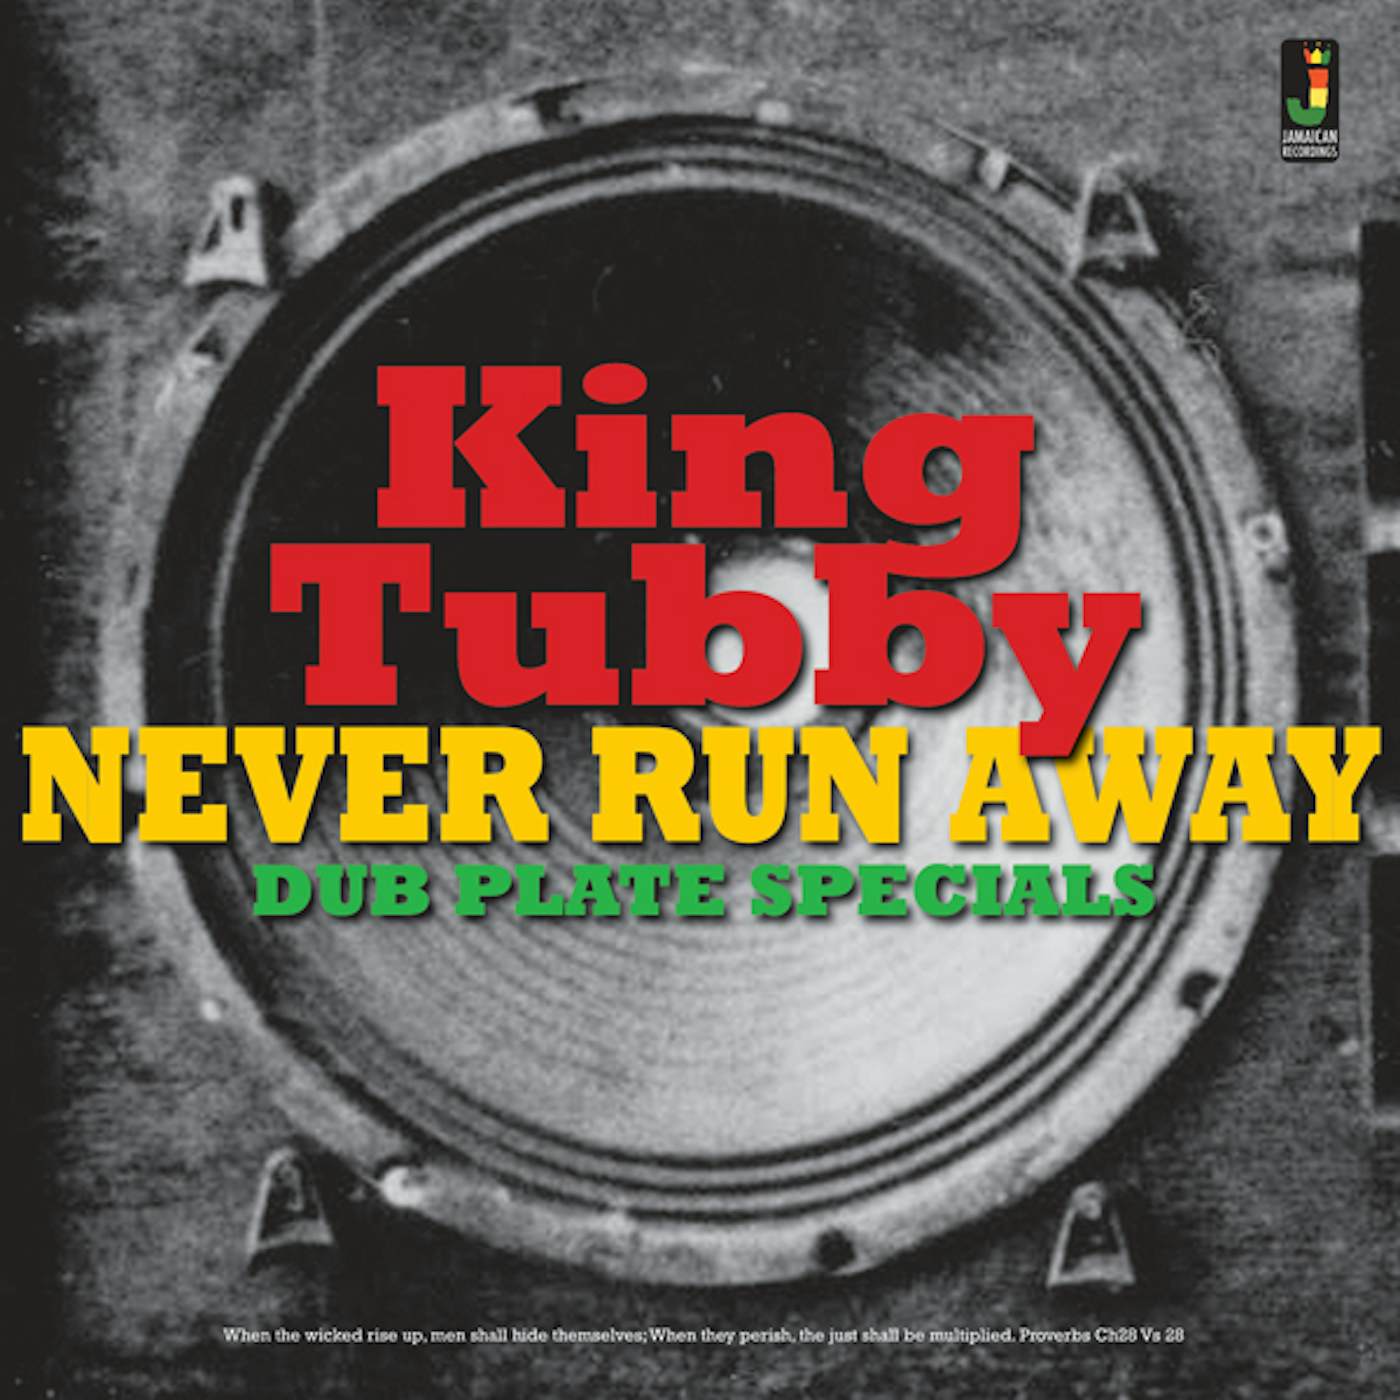 King Tubby NEVER RUN AWAY / DUB PLATE SPECIALS CD